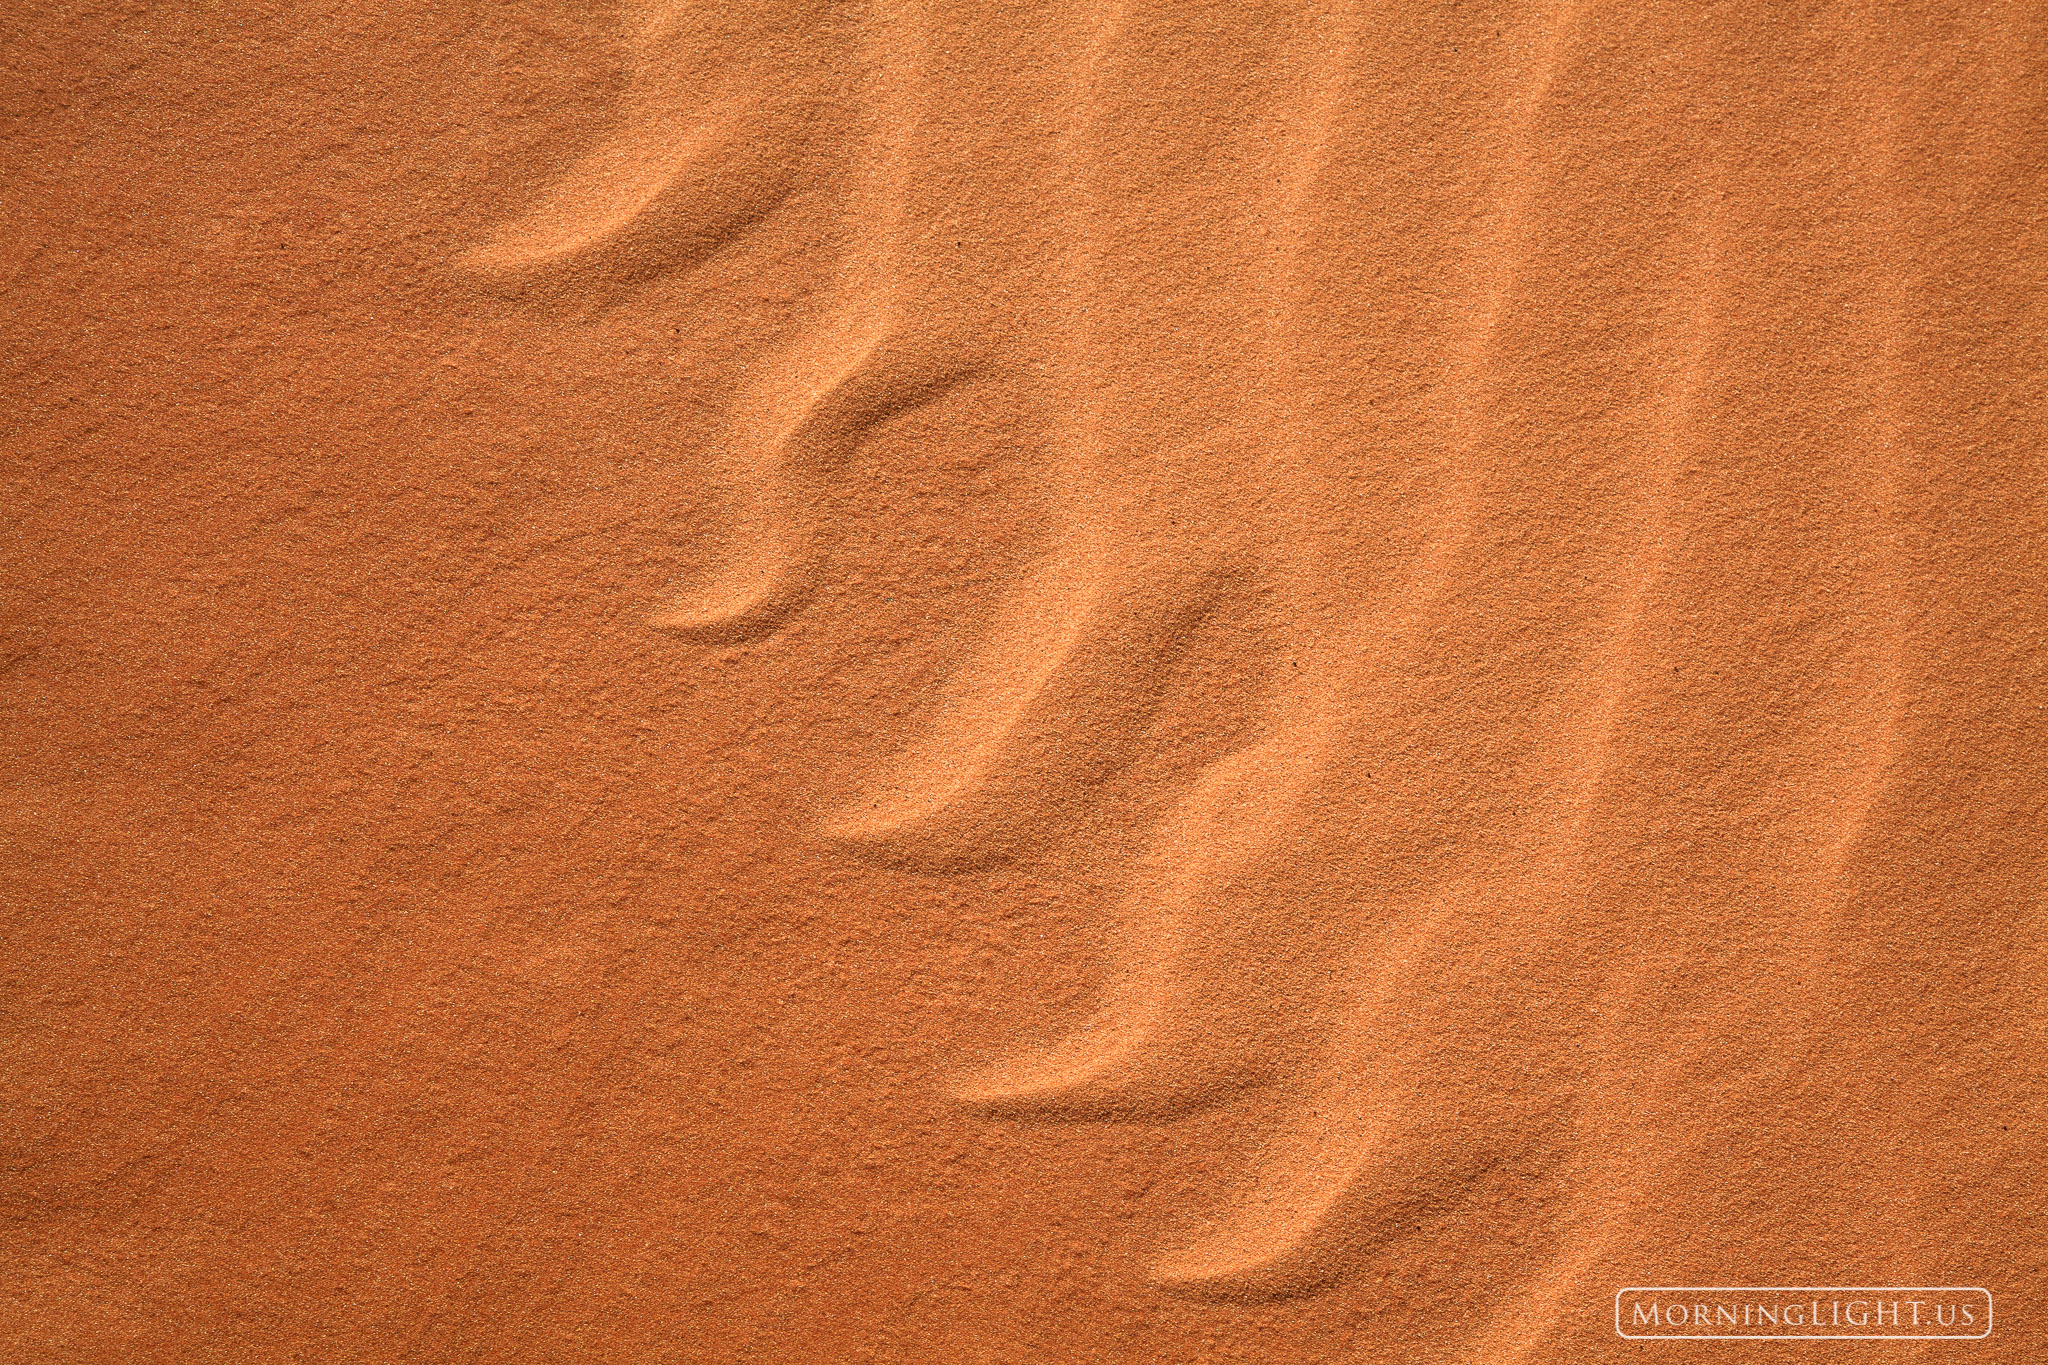 I took a very short side trip to have a look at Coral Pink Sand Dune State Park and was instantly mesmerized by the patterns...